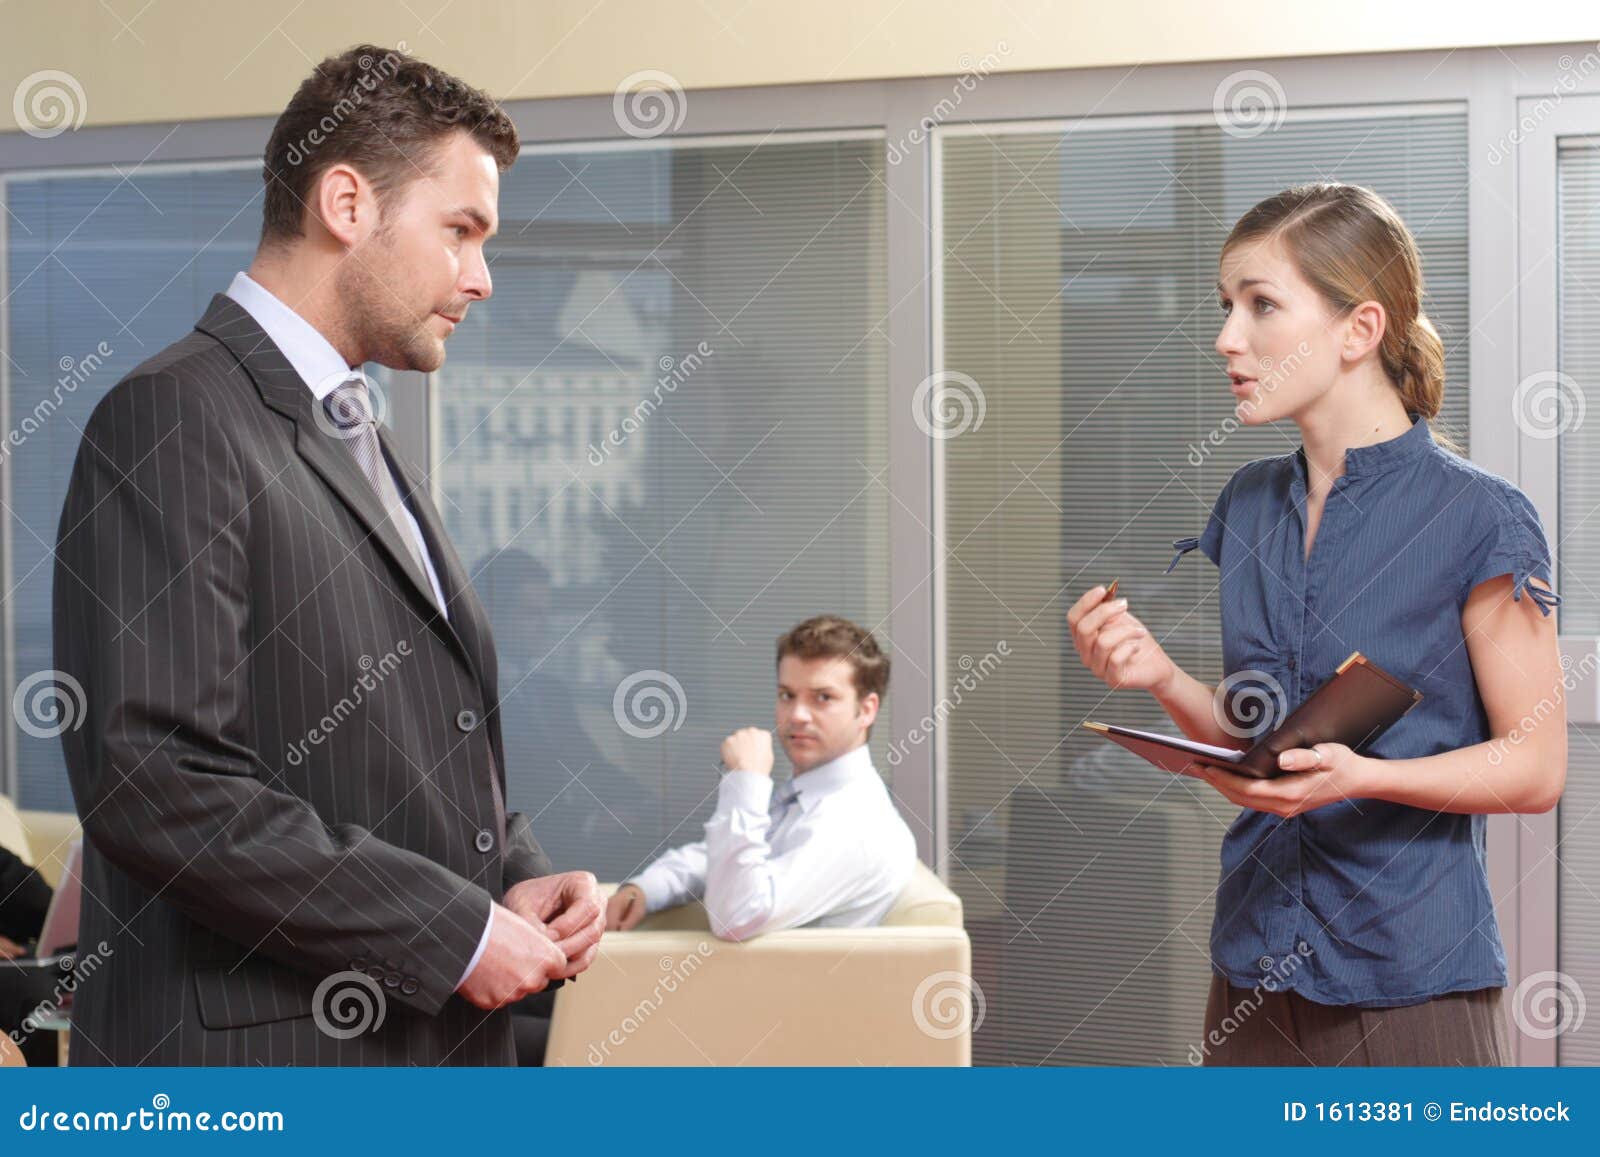 young secretary talking to her boss in the office